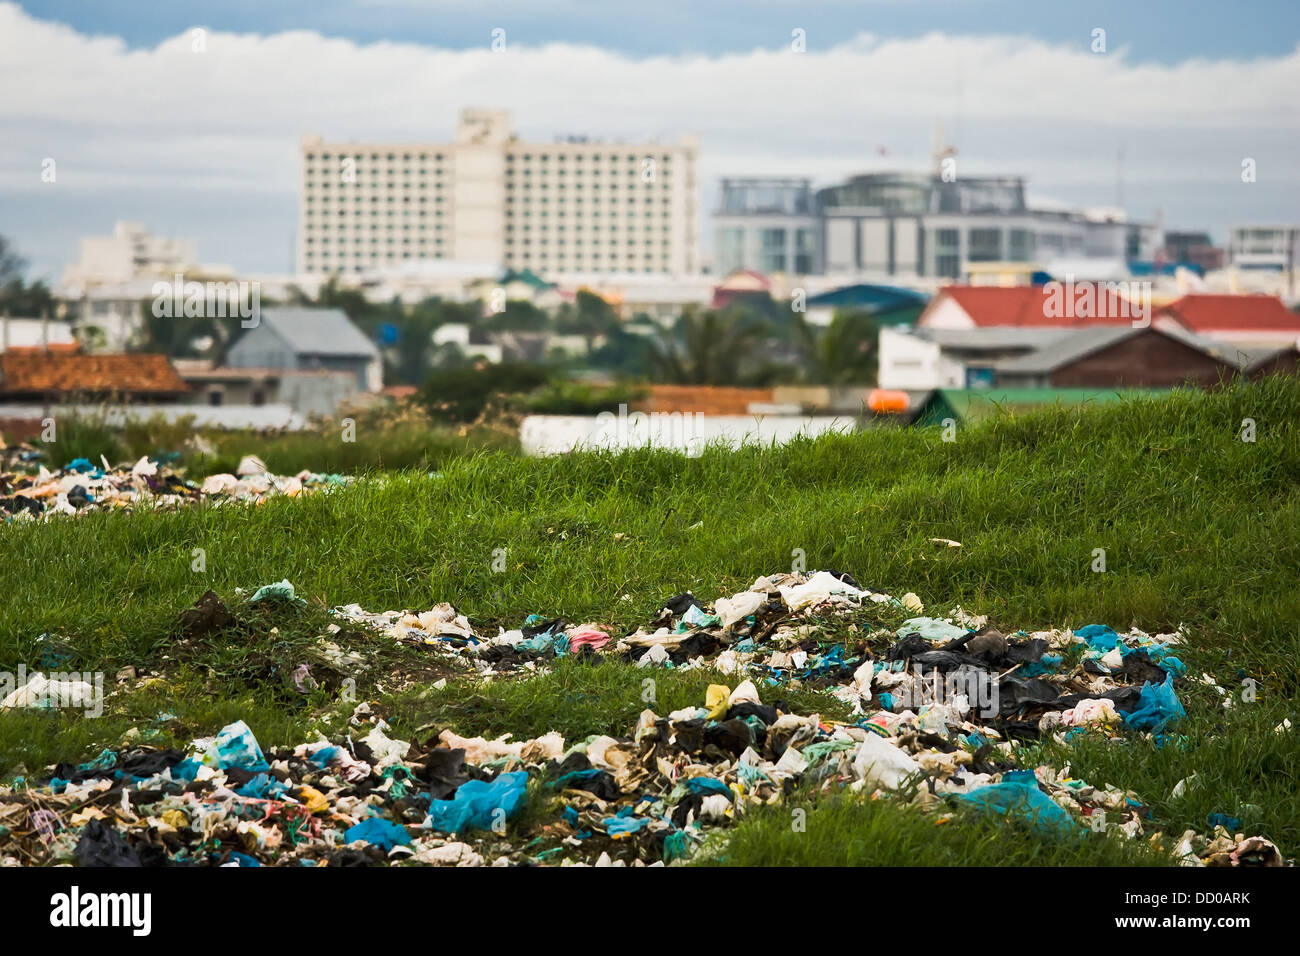 A Garbage Dump On The Outskirts Of The City; Phnom Penh, Cambodia Stock Photo